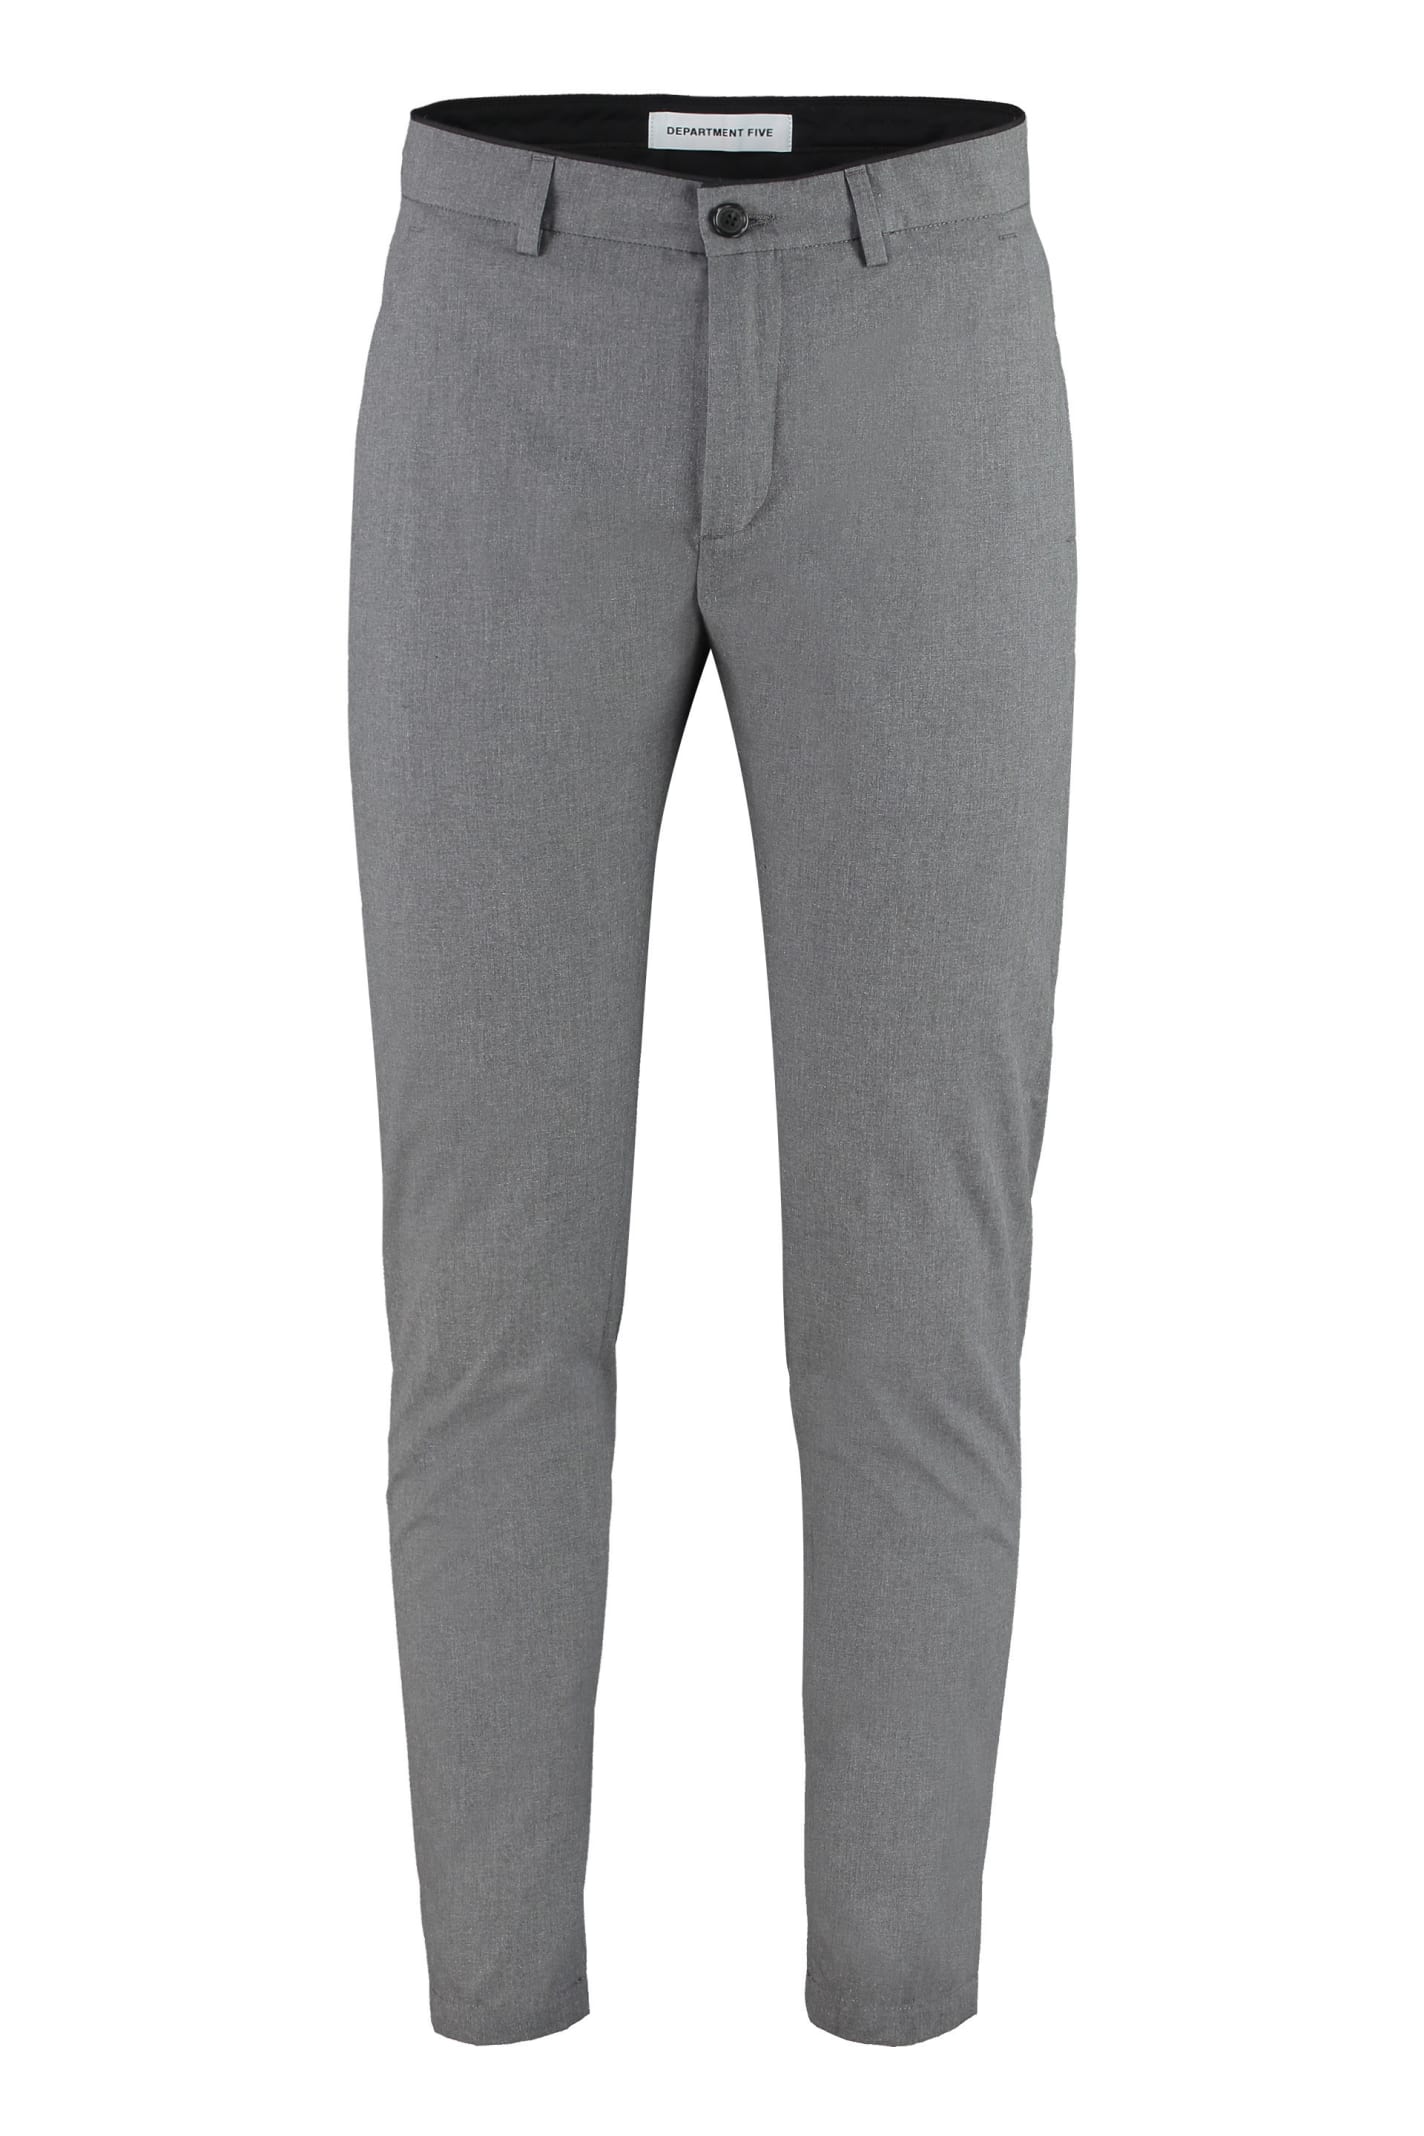 Department 5 Prince Cotton Chino Trousers